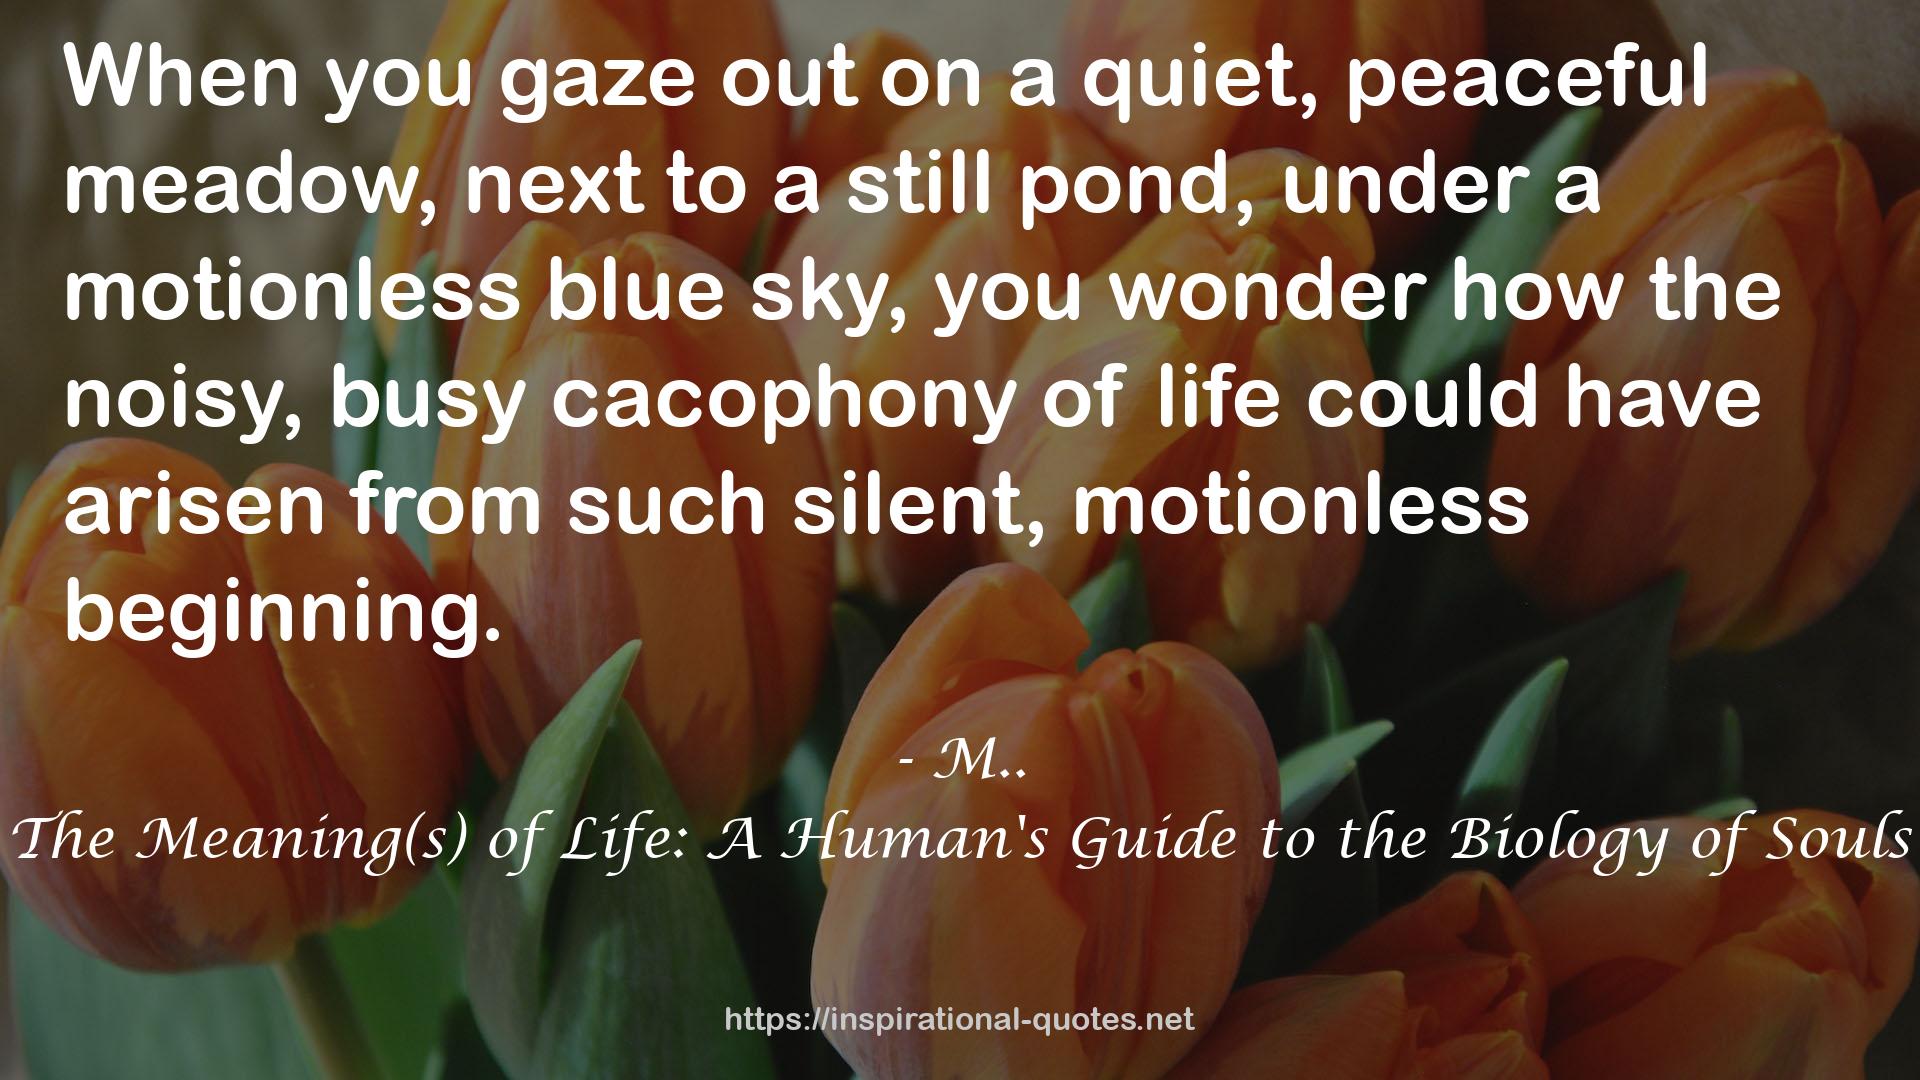 The Meaning(s) of Life: A Human's Guide to the Biology of Souls QUOTES